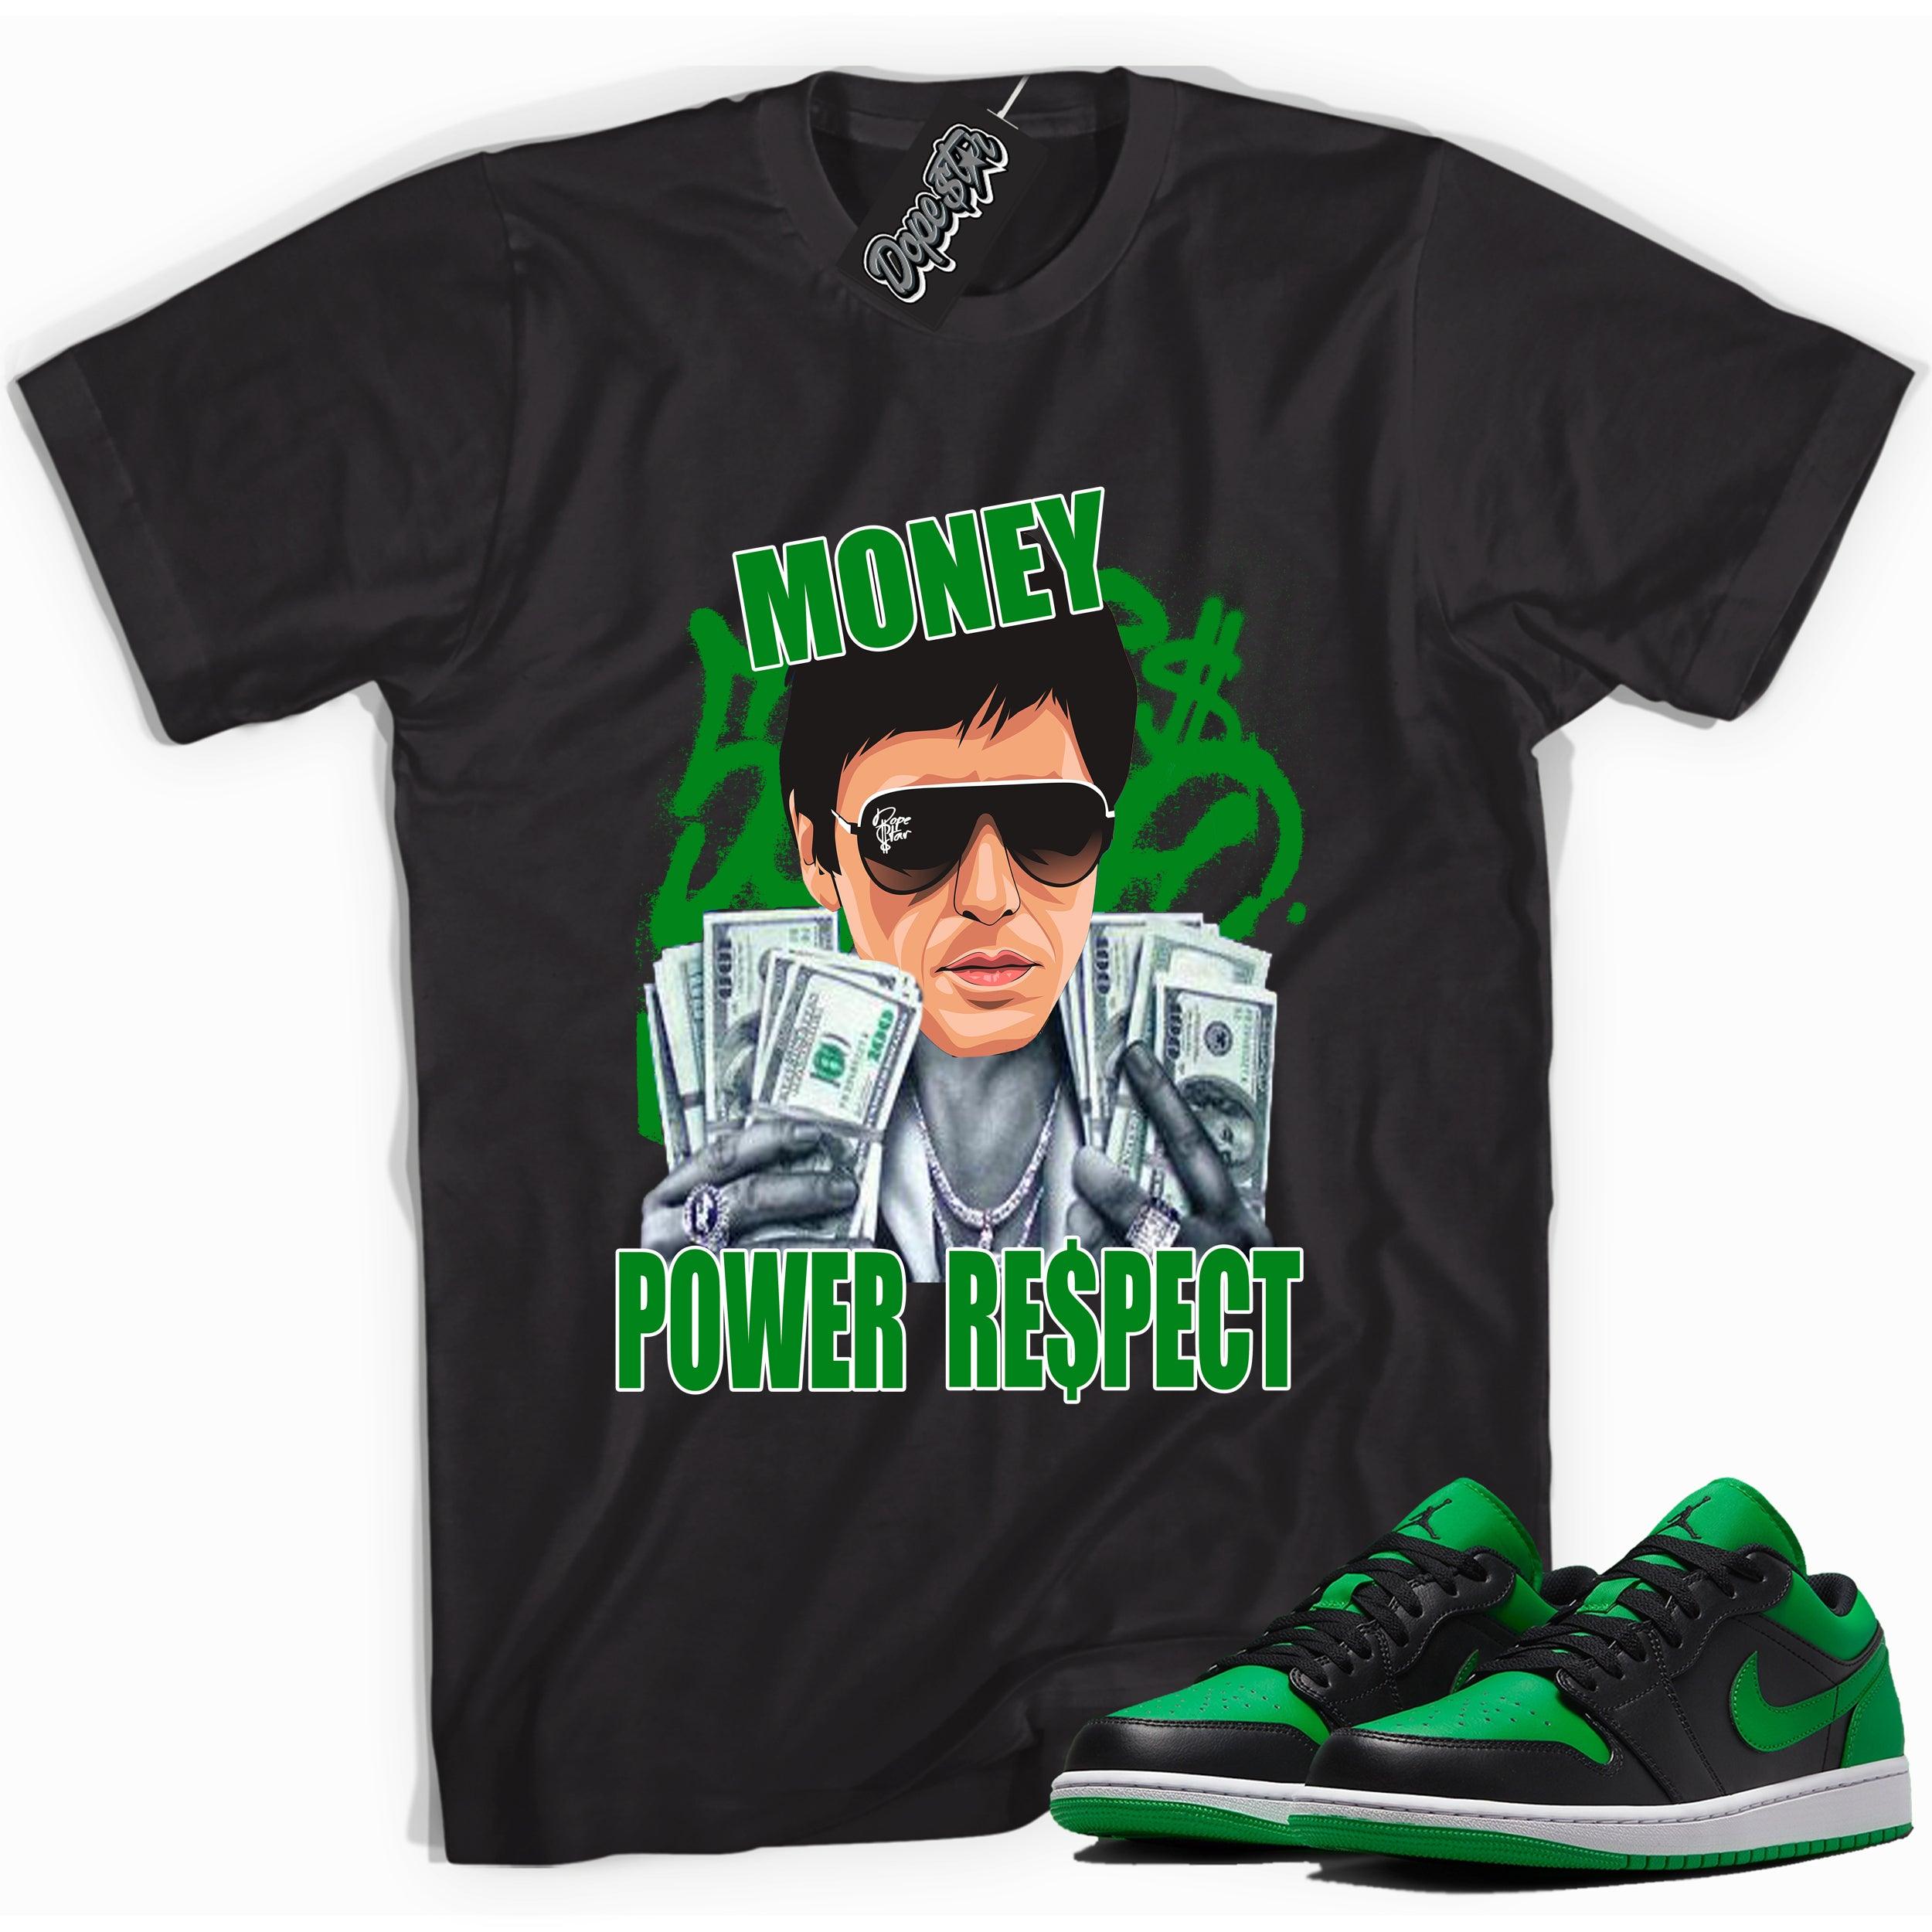 Cool black graphic tee with 'tony montana' print, that perfectly matches Air Jordan 1 Low Lucky Green sneakers